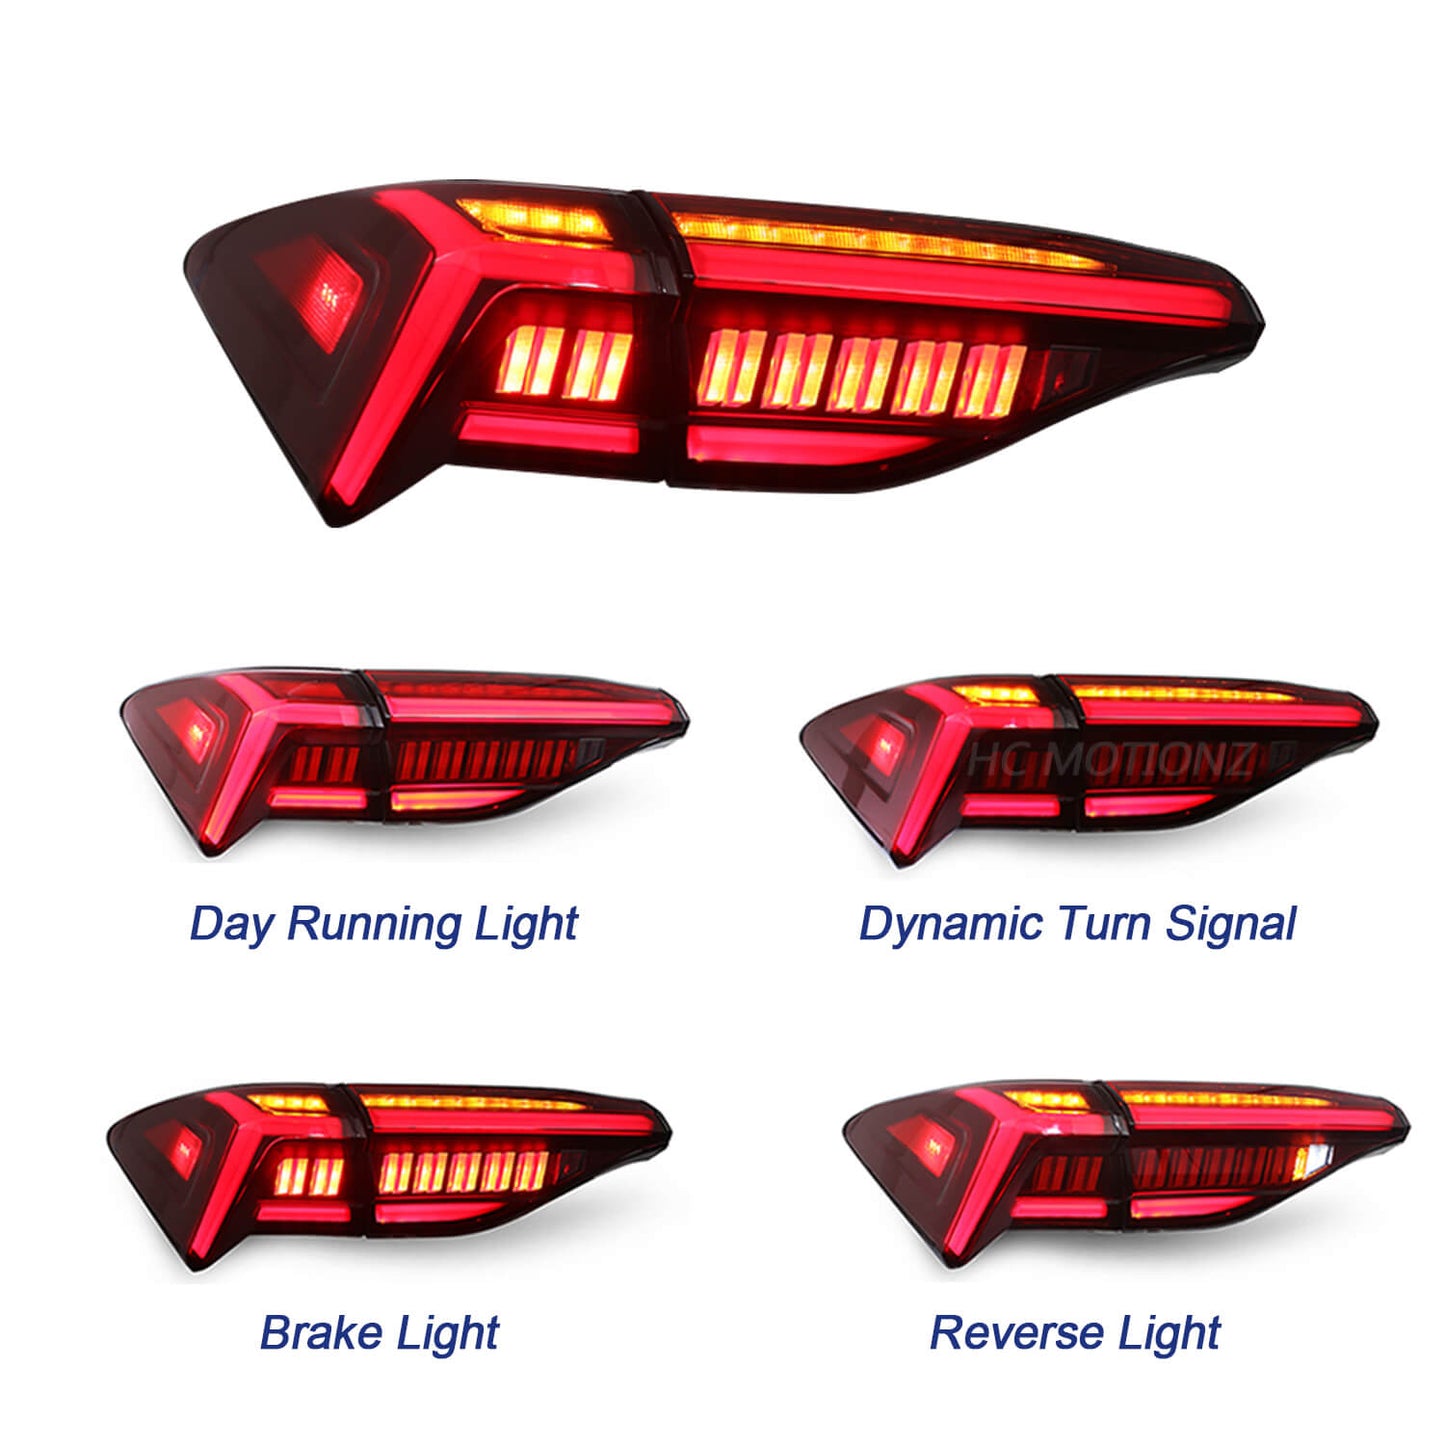 HCMOTION Taillights For Toyota Avalon 2018-2021